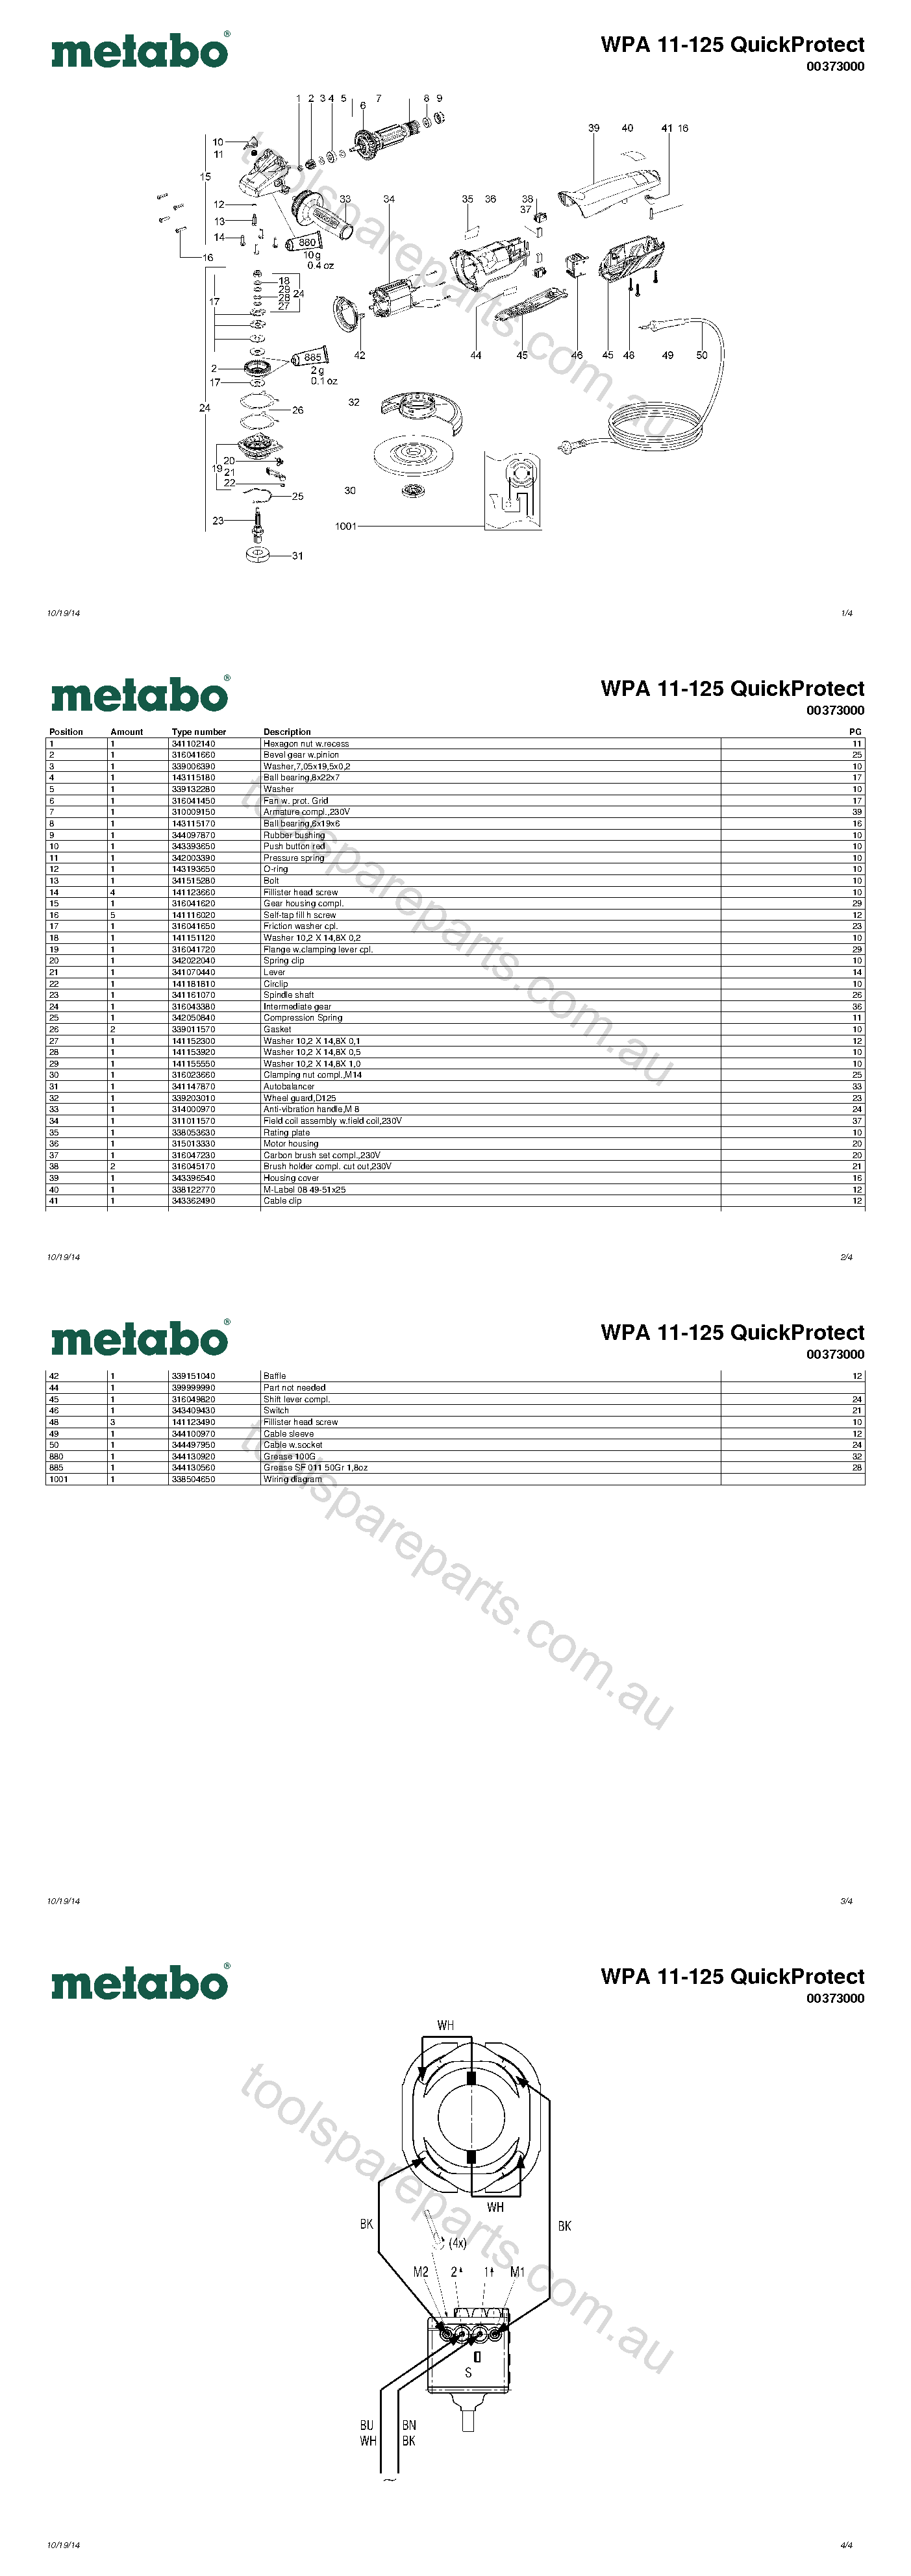 Metabo WPA 11-125 QuickProtect 00373000  Diagram 1